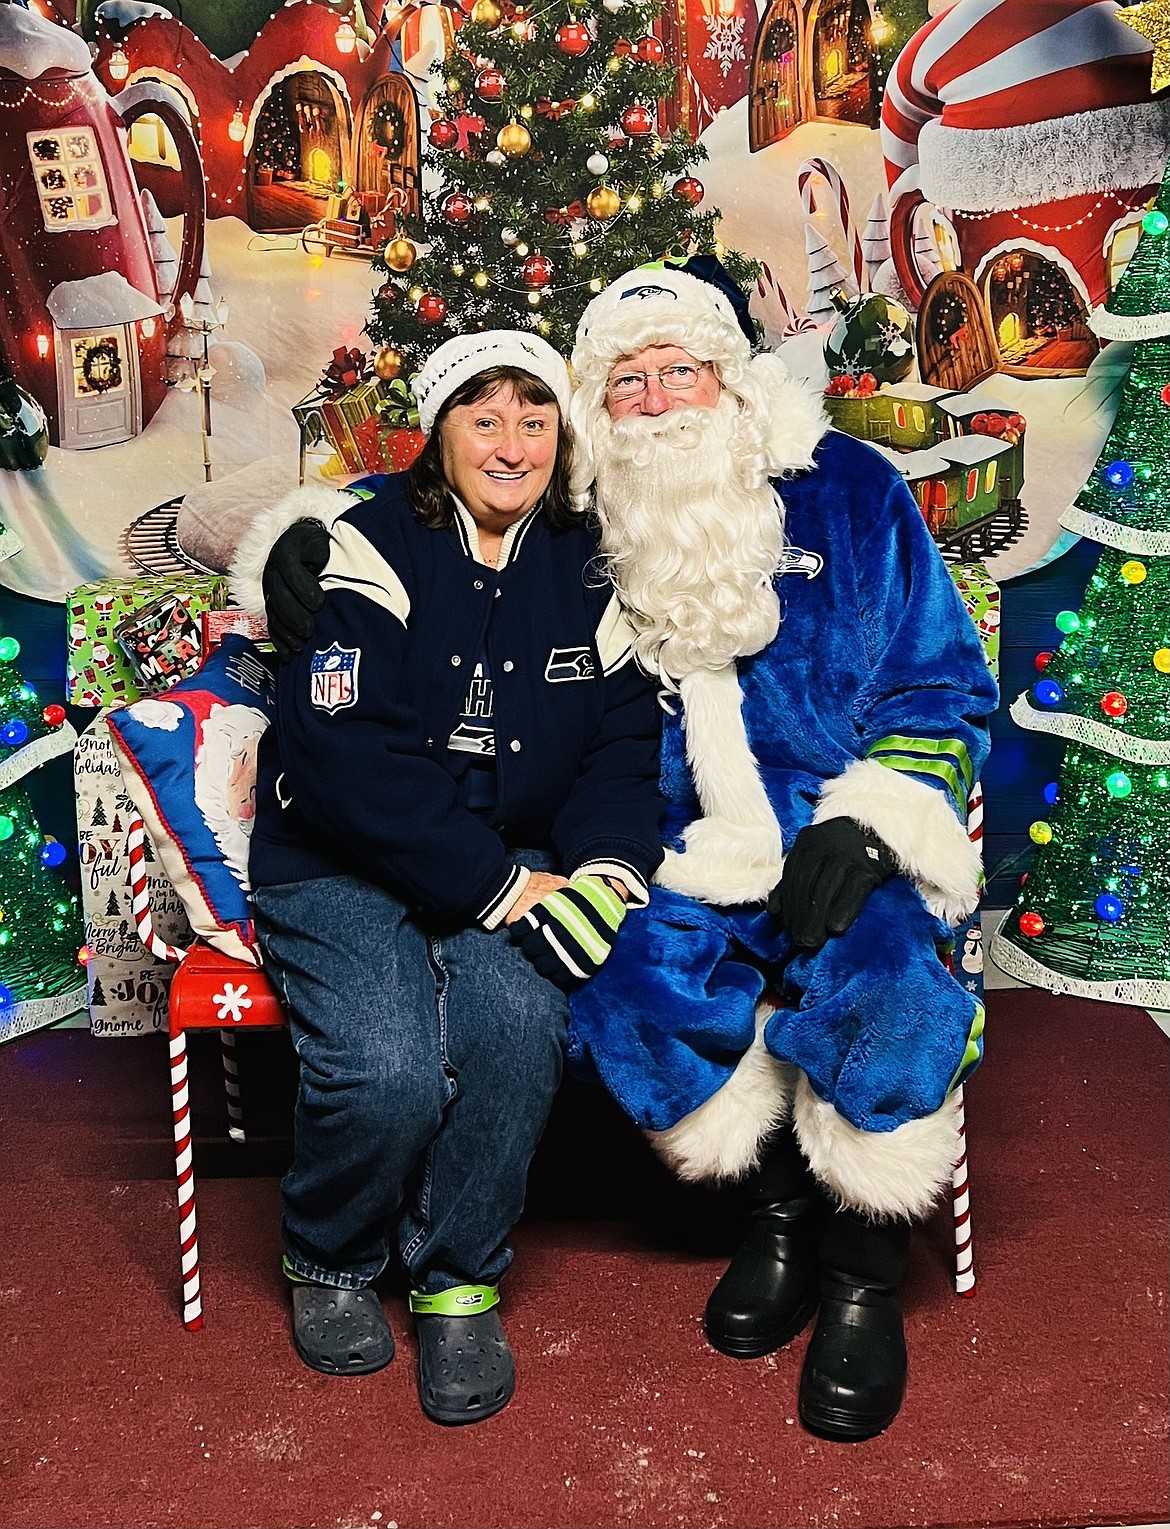 Whether in red or blue, Santa brings joy to those around him. Who says you can't support your favorite team on the job?